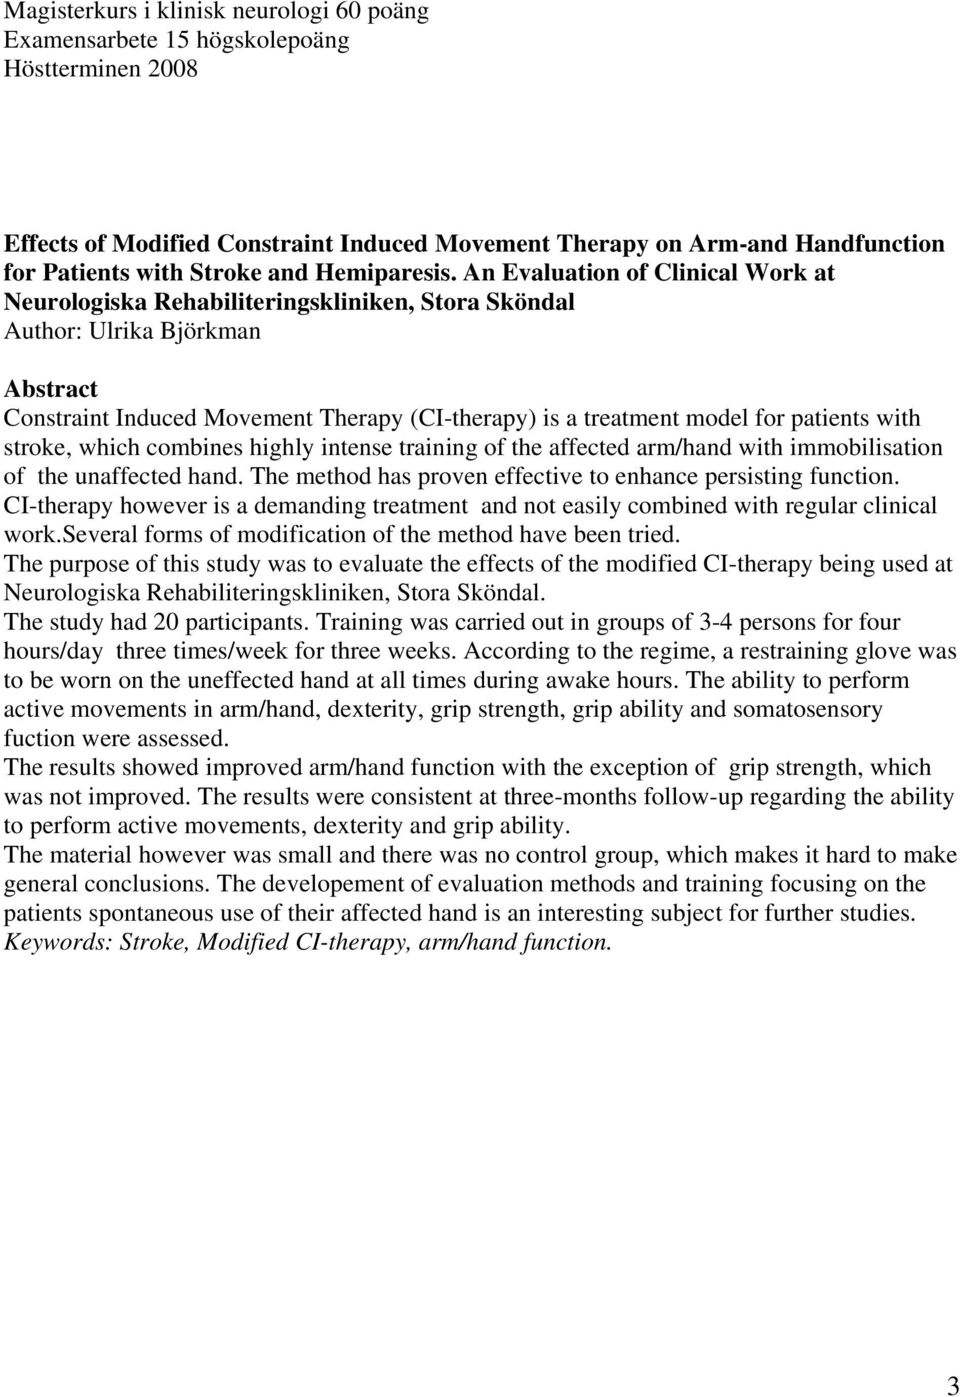 An Evaluation of Clinical Work at Neurologiska Rehabiliteringskliniken, Stora Sköndal Author: Ulrika Björkman Abstract Constraint Induced Movement Therapy (CI-therapy) is a treatment model for